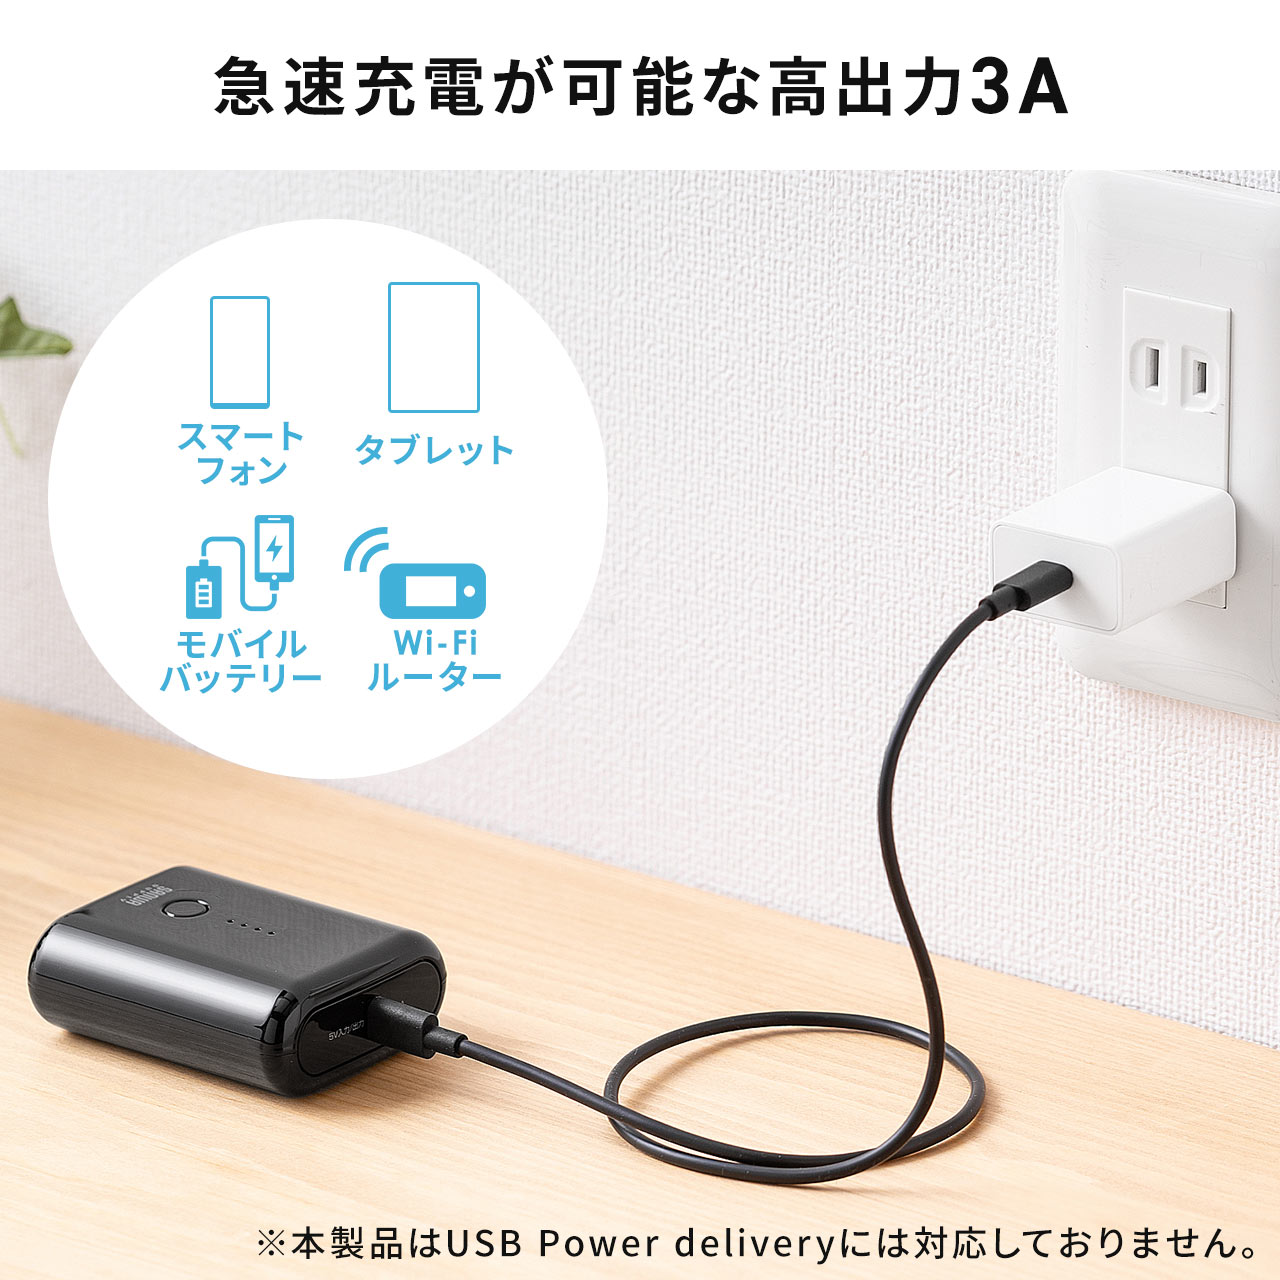 USB充電器 Type-C 1ポート 3A コンパクト PSE適合品 Android iPhone